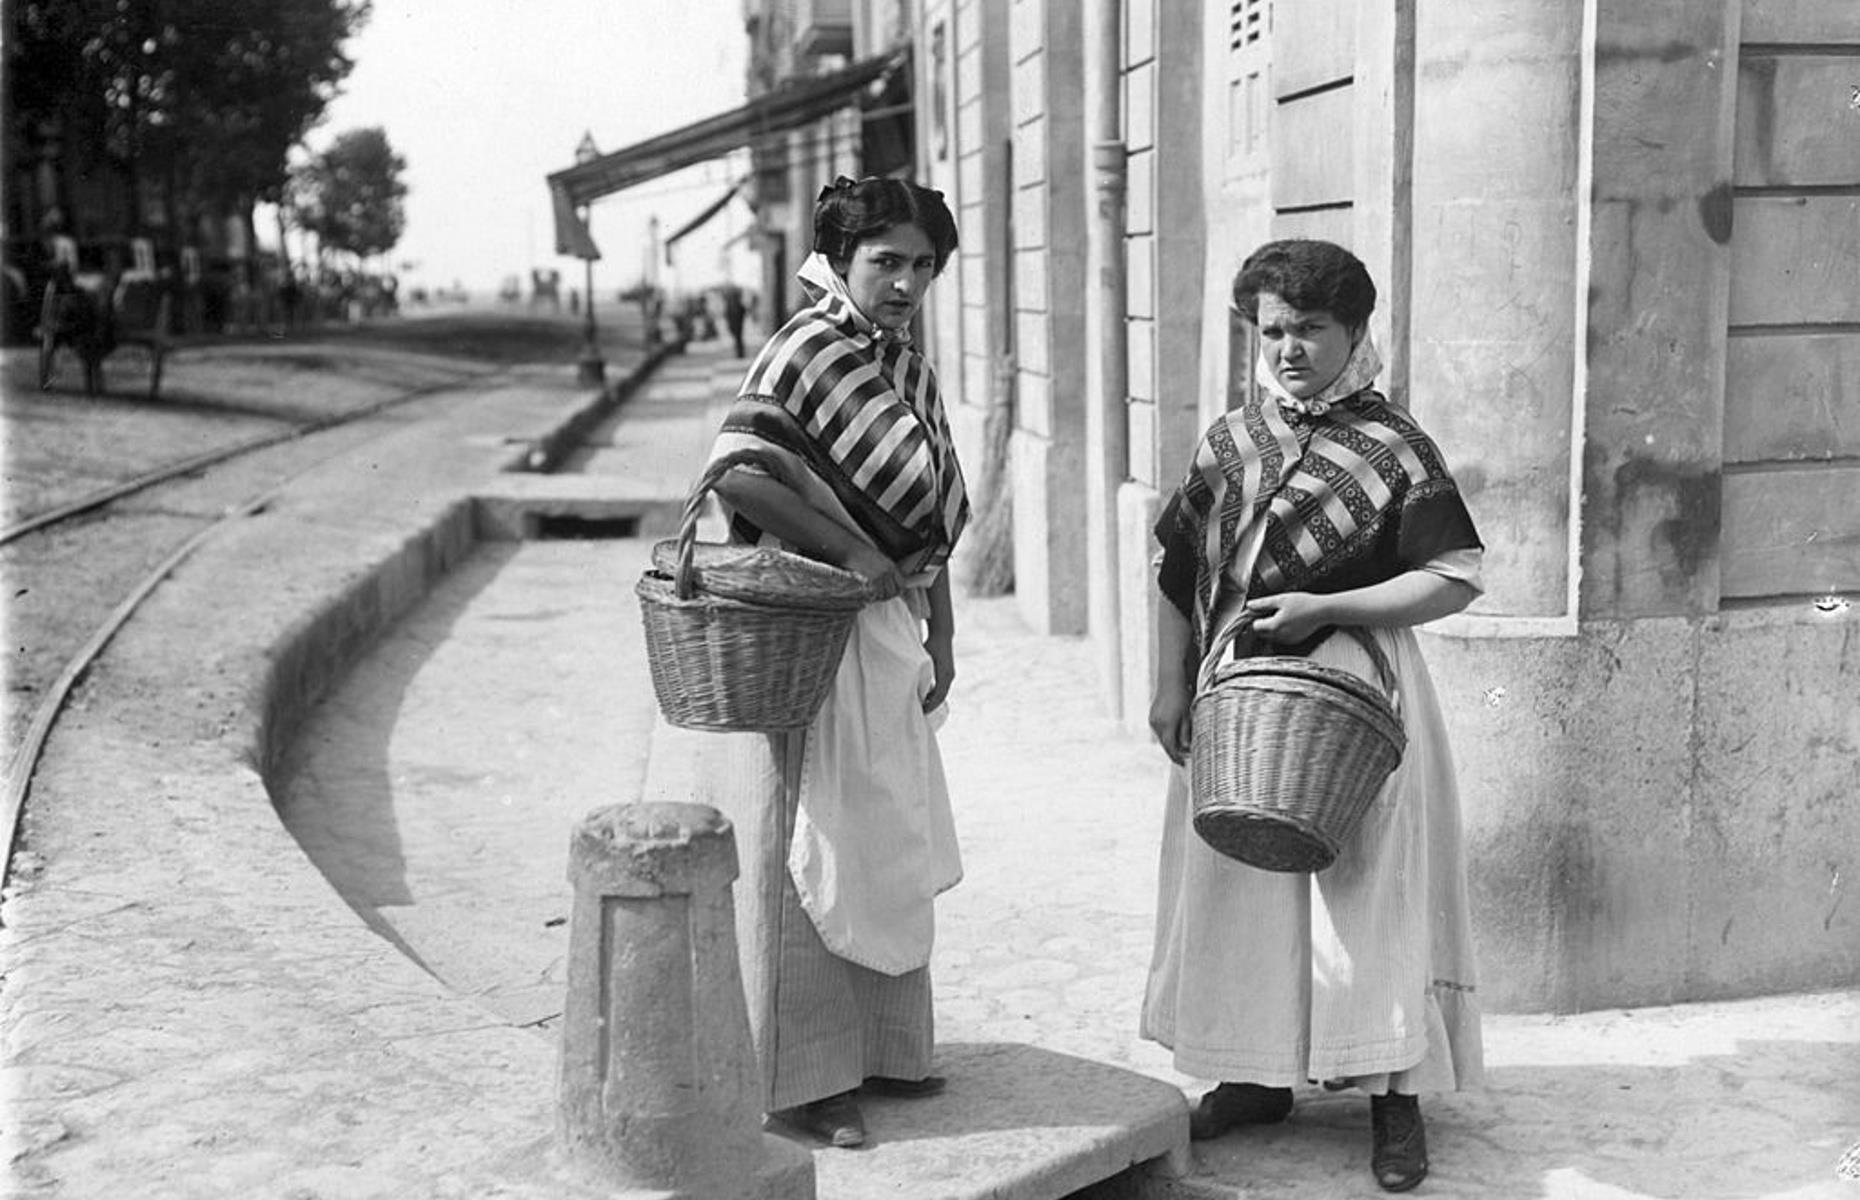 <p>Before hotels and mass tourism arrived on Spain’s magical Balearic Islands in the 1950s, Mallorca's unique culture had changed very little over the centuries. This 1930s photo shows women dressed in traditional costume with striped shawls and ‘rebozillo’ headscarves, a common sight until tourism began to develop on the island under Spain’s fascist regime as a much-needed source of revenue.</p>  <p><strong>Liked this? Click on the Follow button above for more great stories from loveEXPLORING</strong></p>  <p><strong><a href="https://www.loveexploring.com/galleries/116491/what-your-favourite-destinations-looked-like-before-tourism?page=1">Now discover what your favourite destinations in other parts of the world looked like before tourism arrived</a></strong></p>